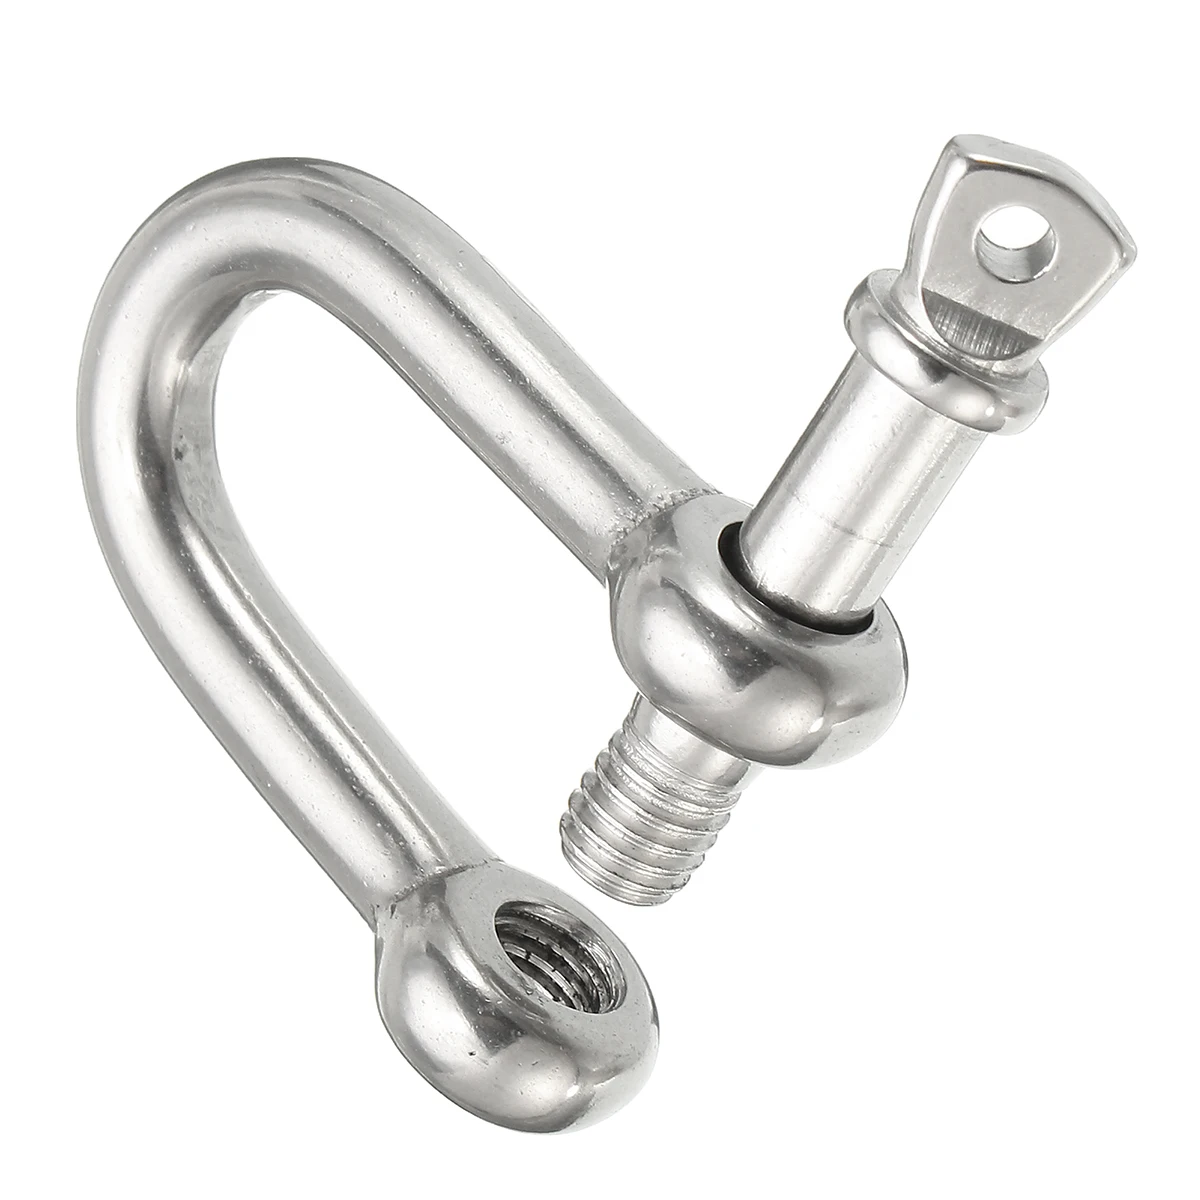 Hiking and Other Outdoor Sports 6mm 8mm 10mm 14mm SMTUNG 304 Stainless Steel D Shape Load Shackle for Camping 